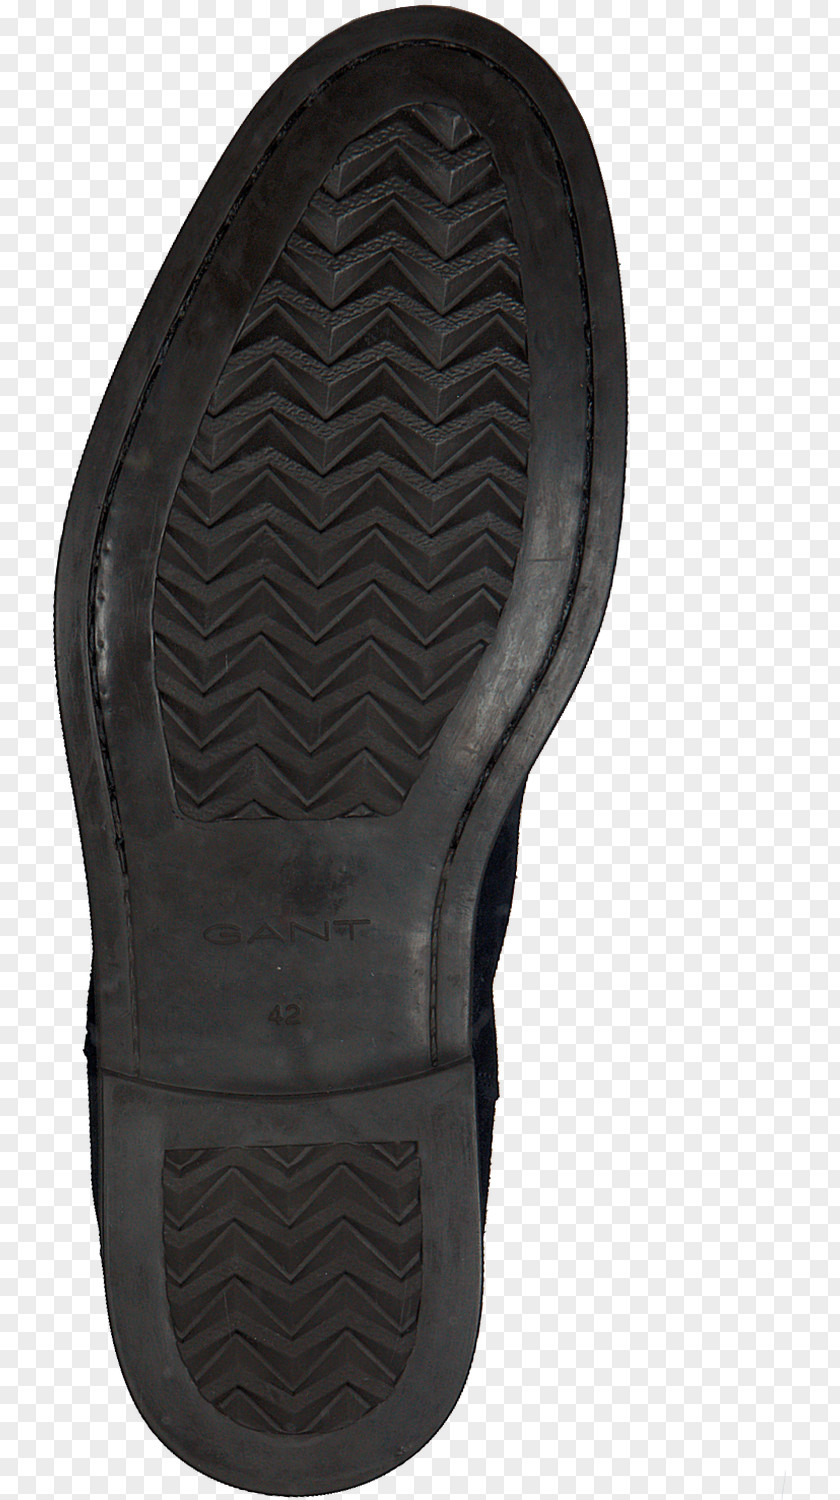 Oscar Chelsea Boots Boot Shoe Industrial Design Product PNG